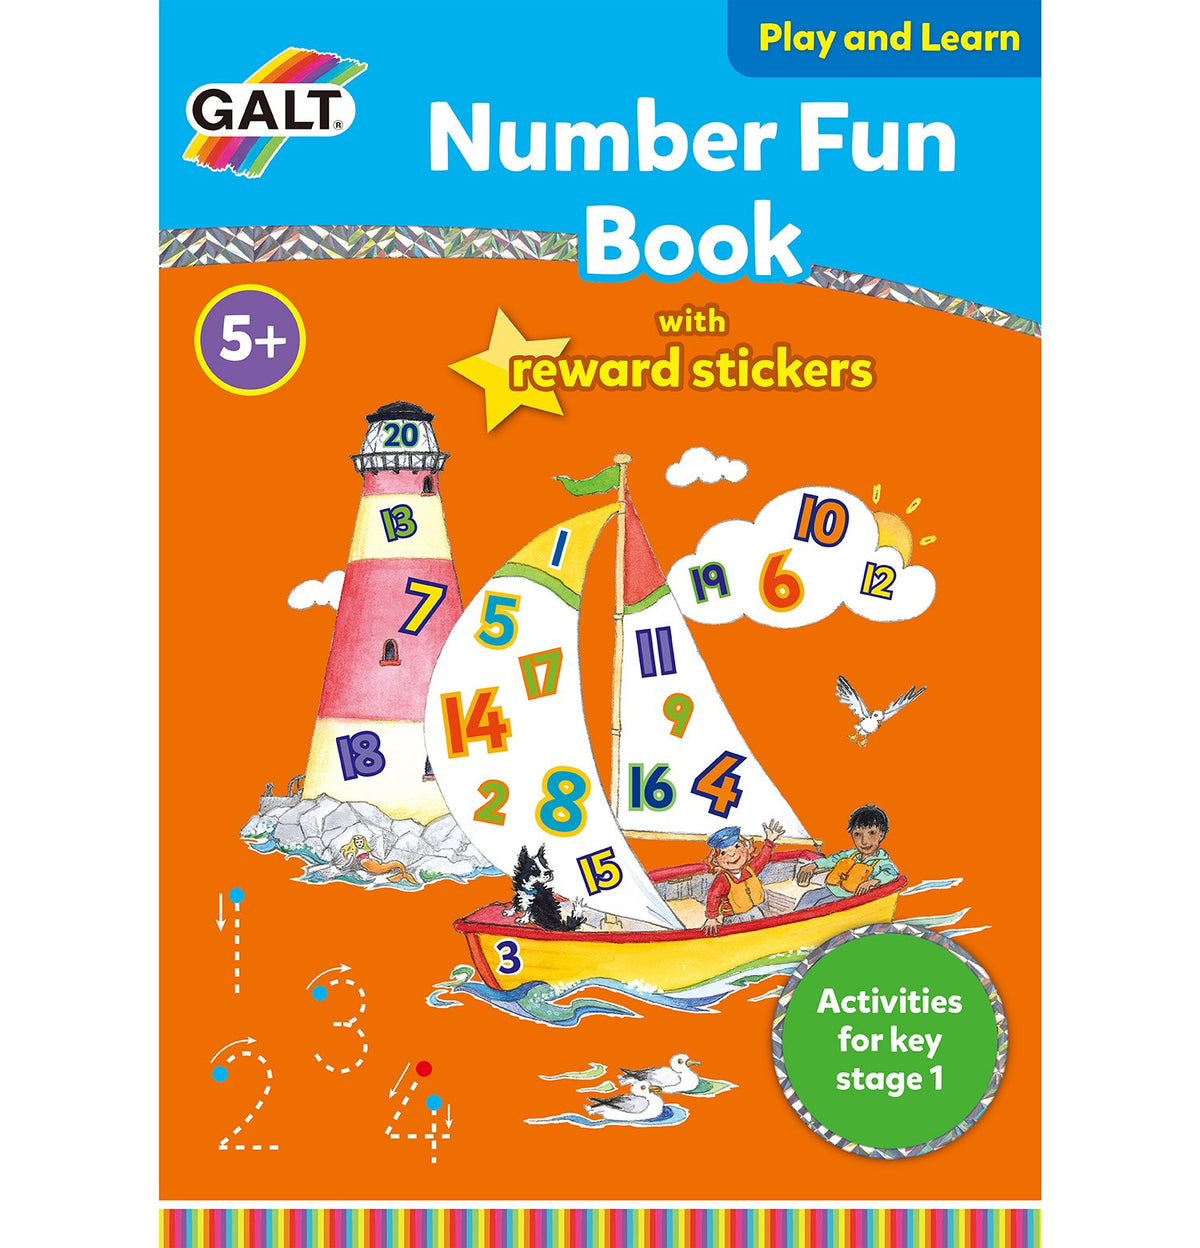 Home Learning Books - Play and Learn - Galt